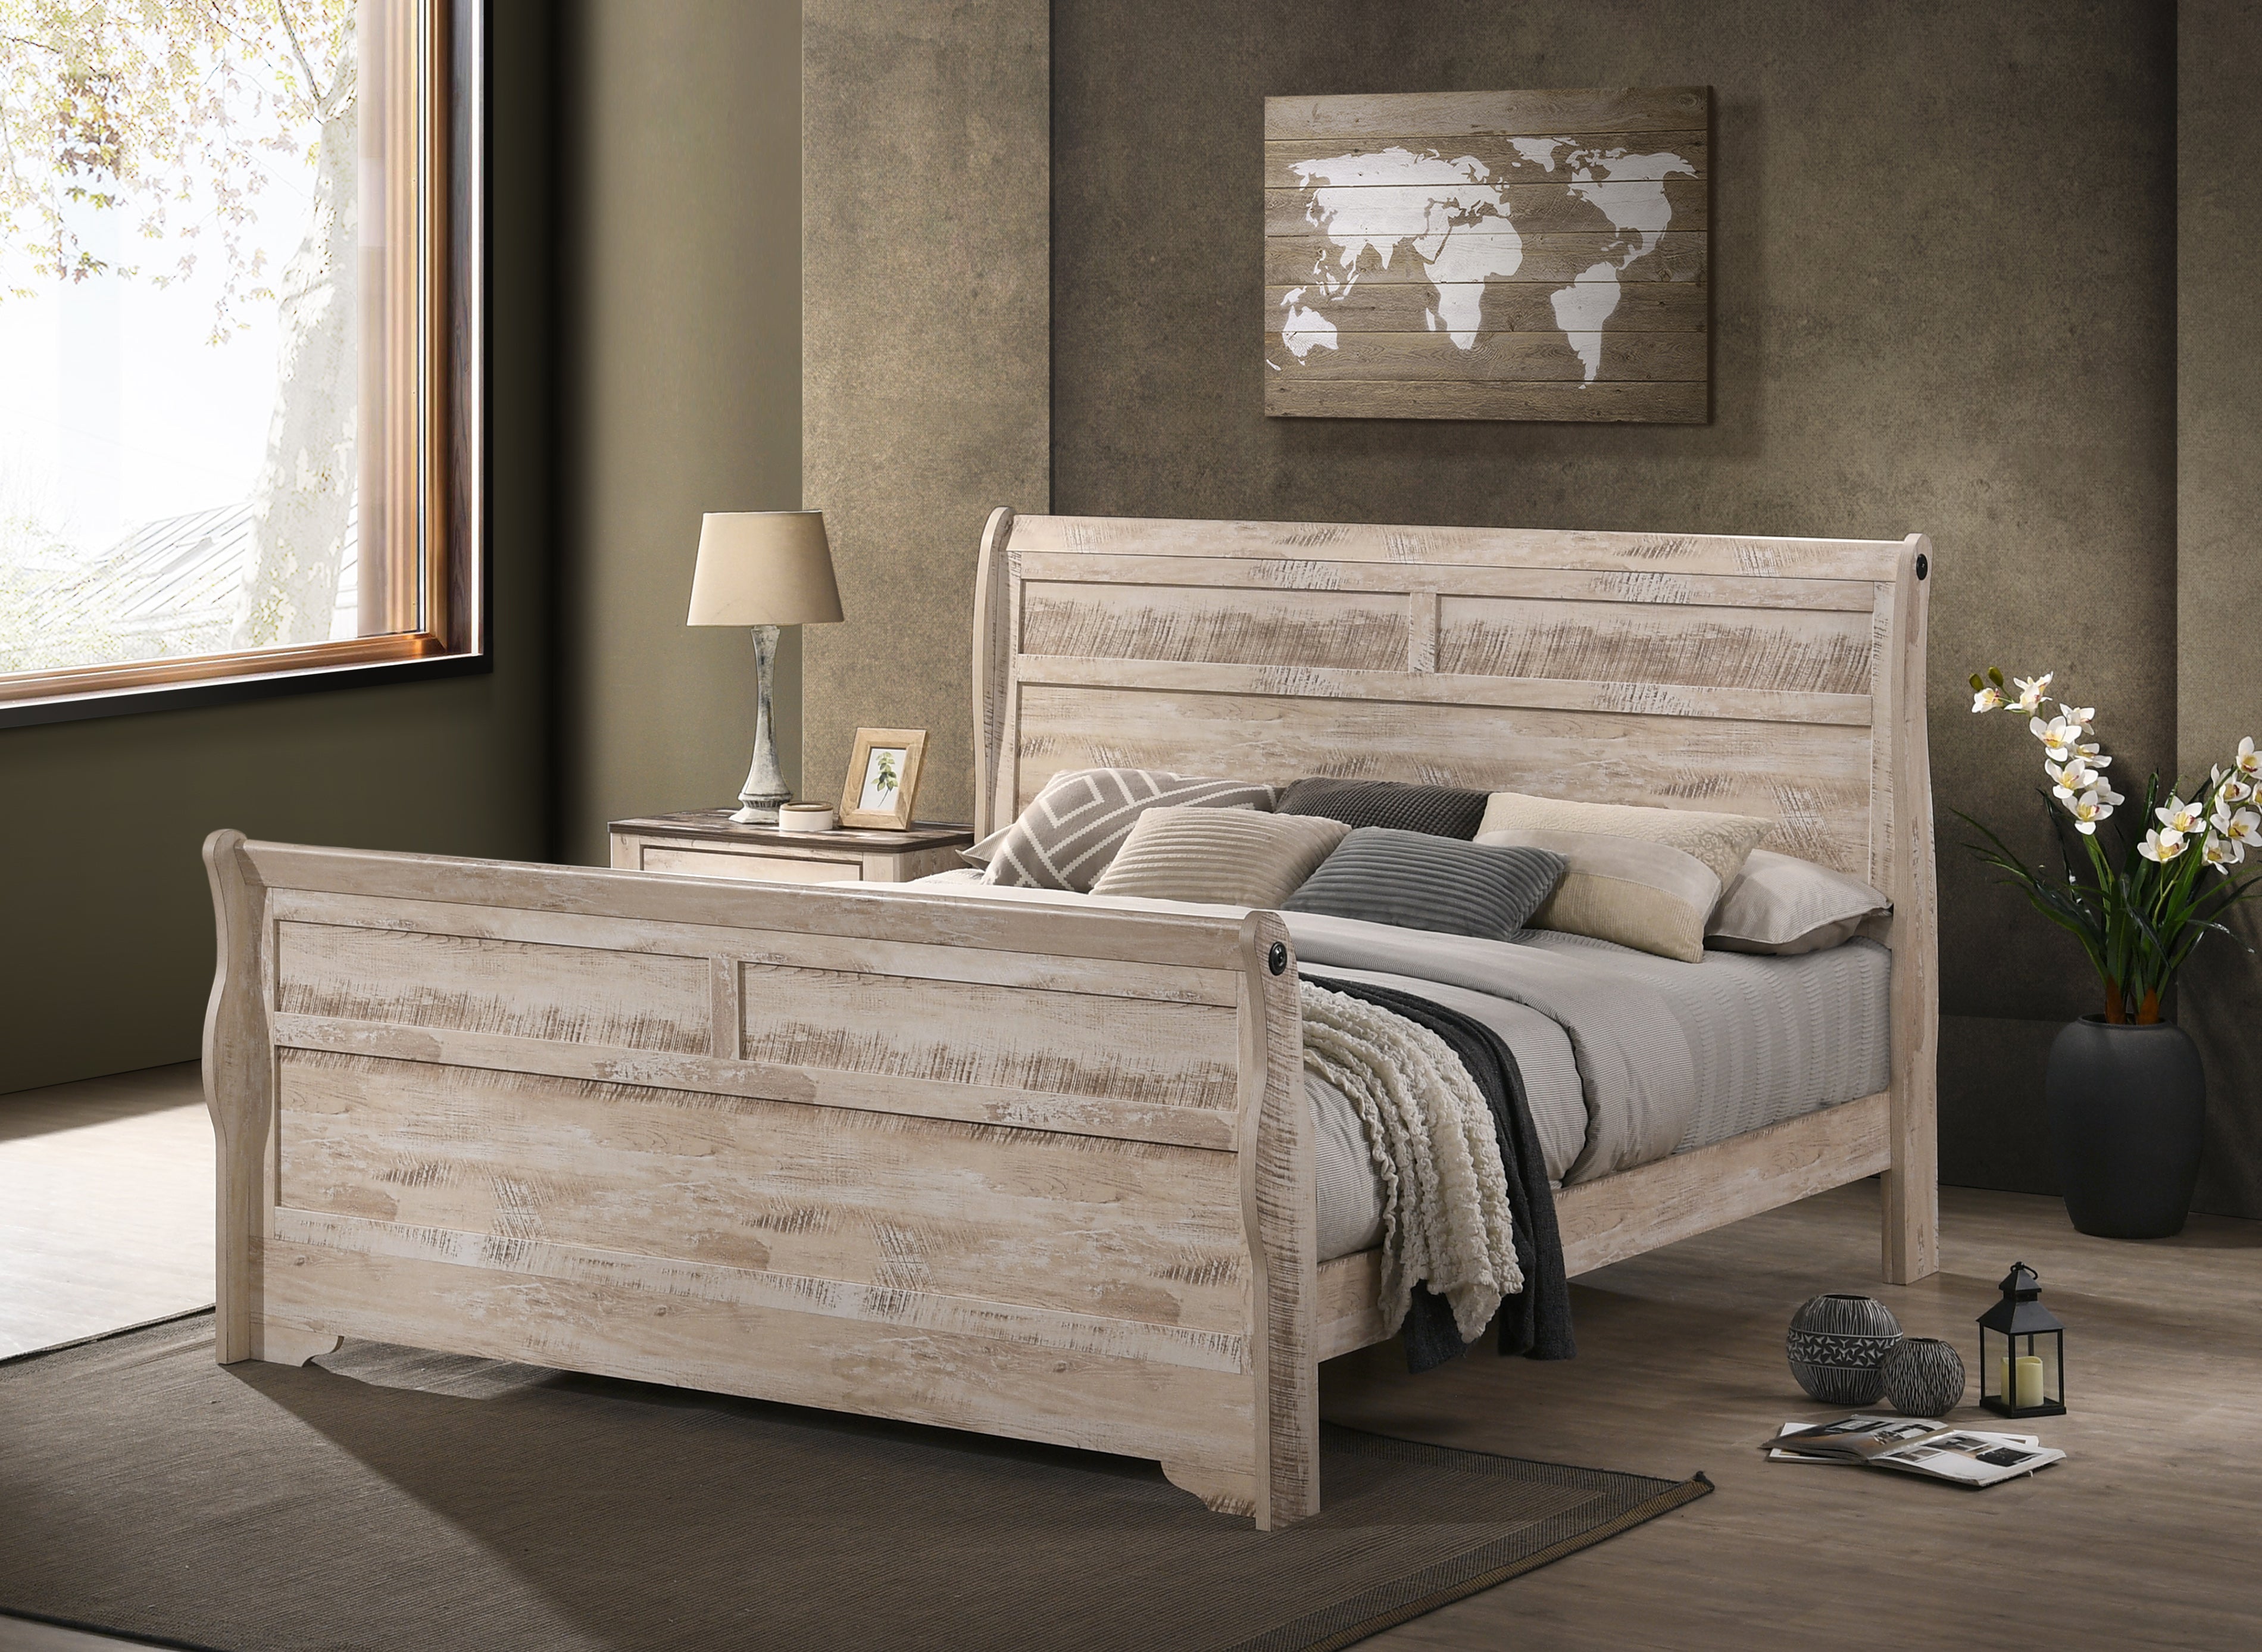 Imerland Contemporary White Wash Finish Bedroom Collection 